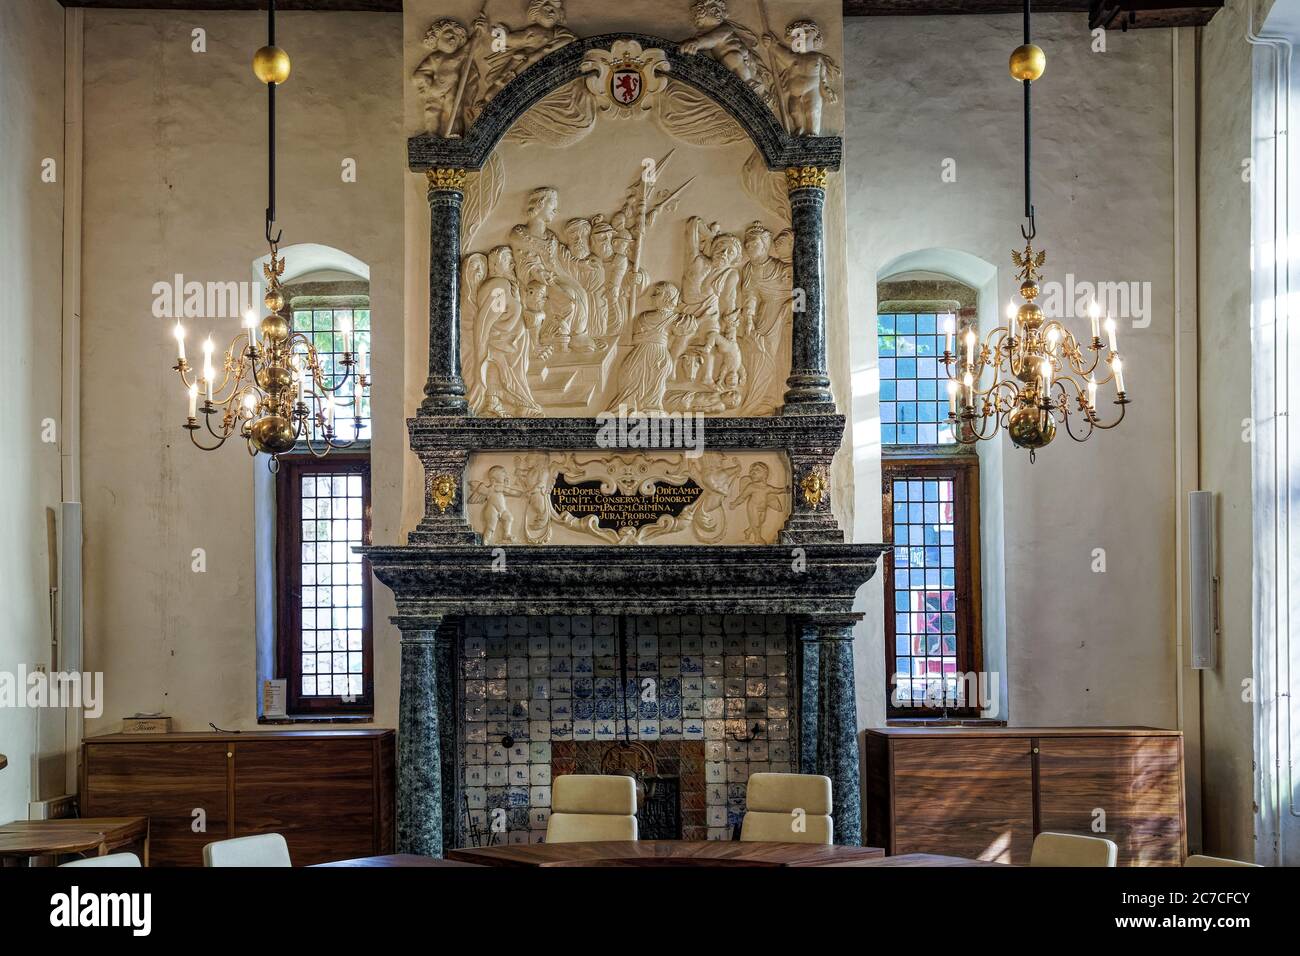 Interior shot of a fireplace in a Christian church decorated with bible scenes in the Netherlands Stock Photo